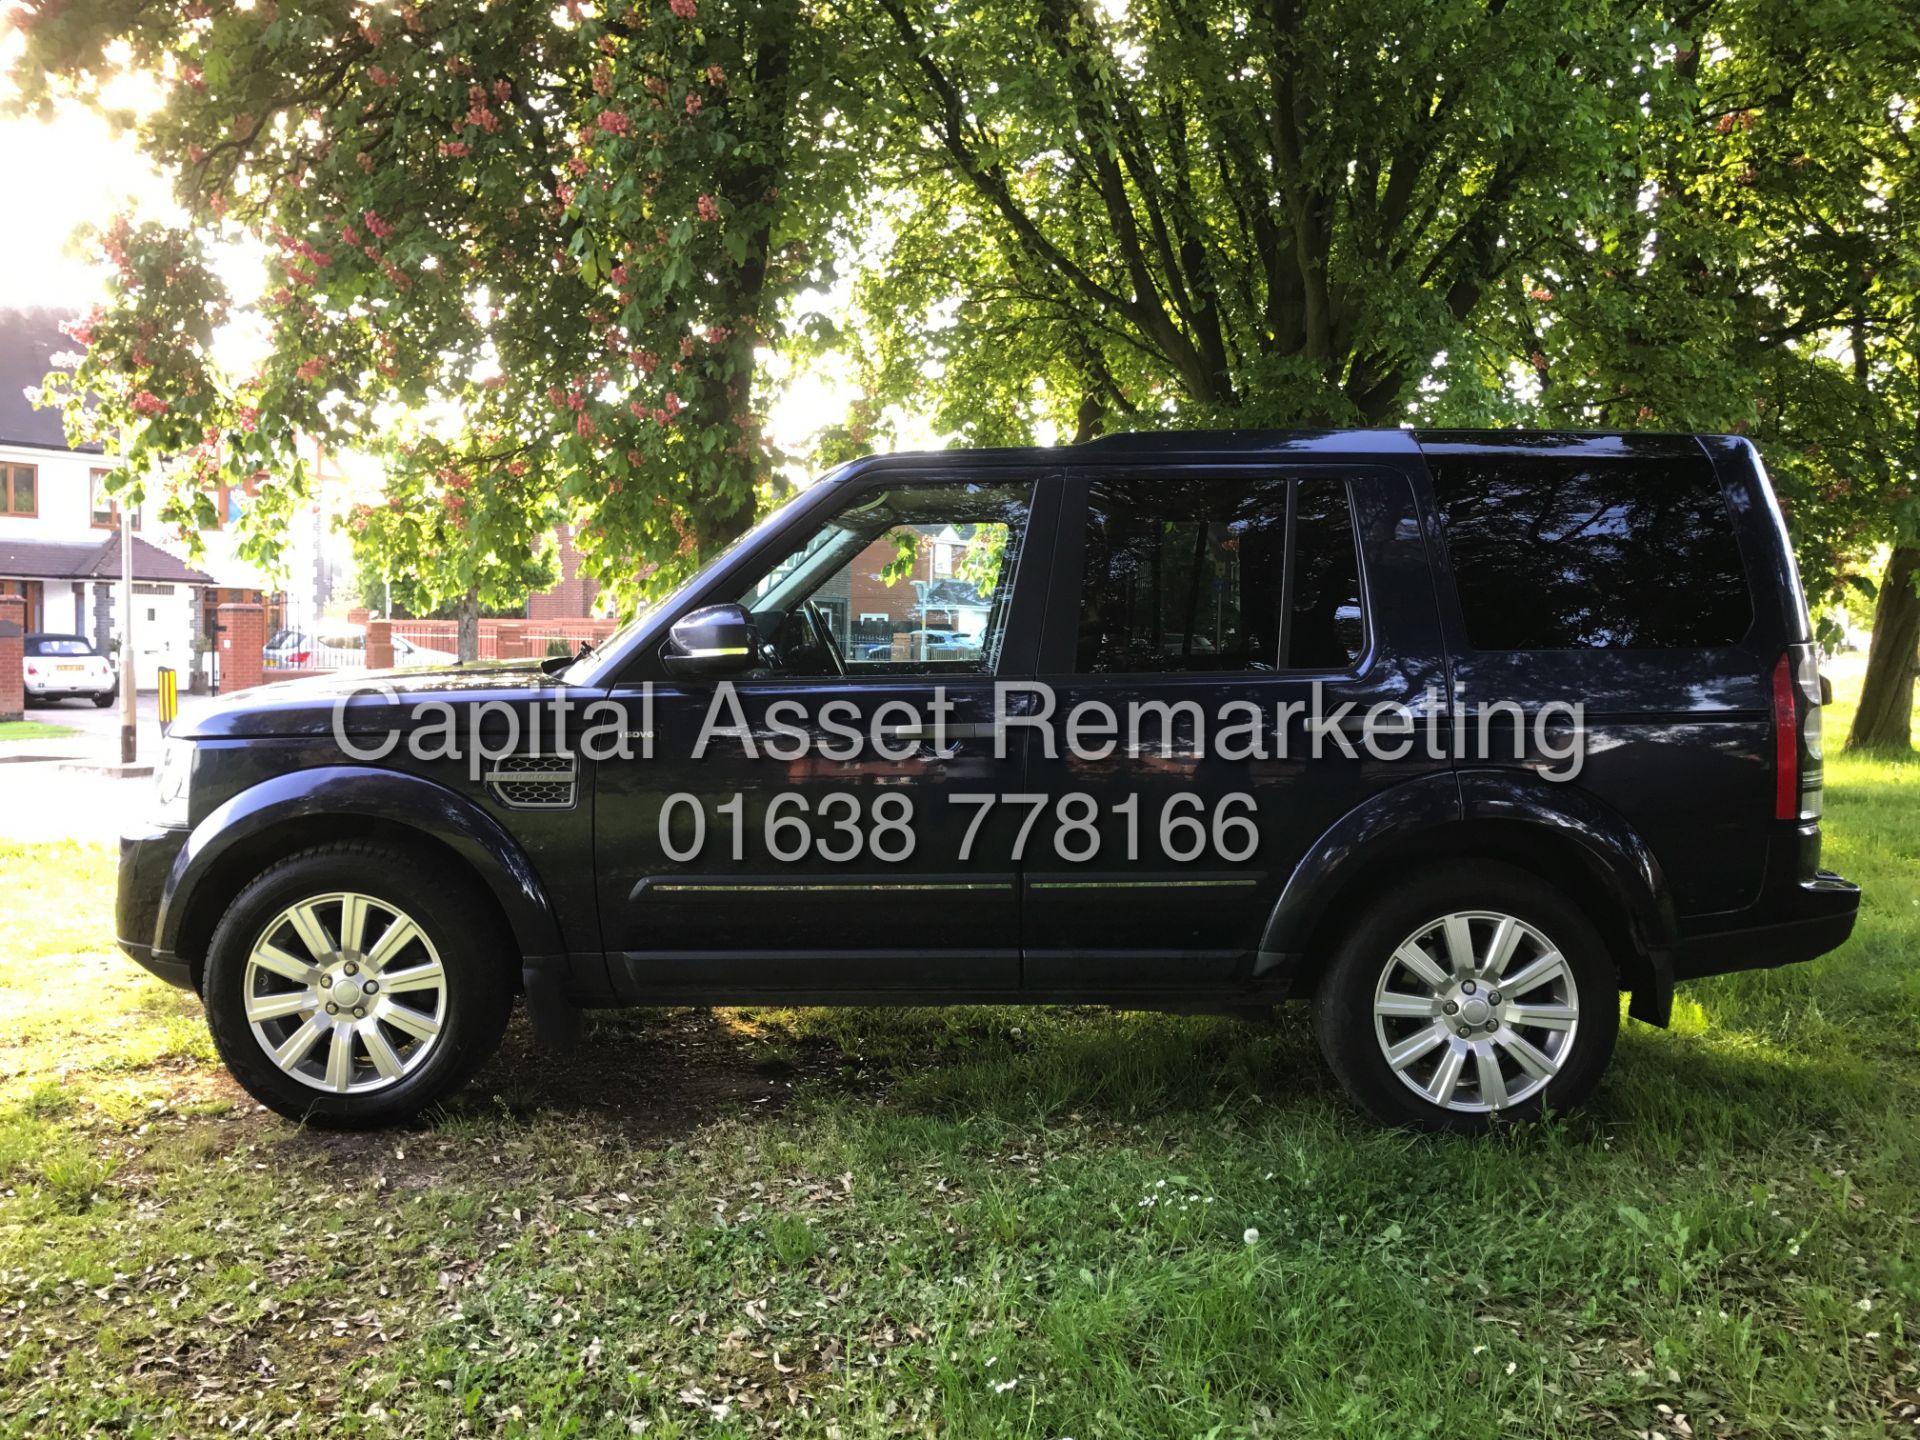 (On Sale) LAND ROVER DISCOVERY 4 'XS EDITION' *COMMERCIAL* (2015) '3.0 SDV6 - AUTO-LEATHER-SAT NAV' - Image 6 of 32